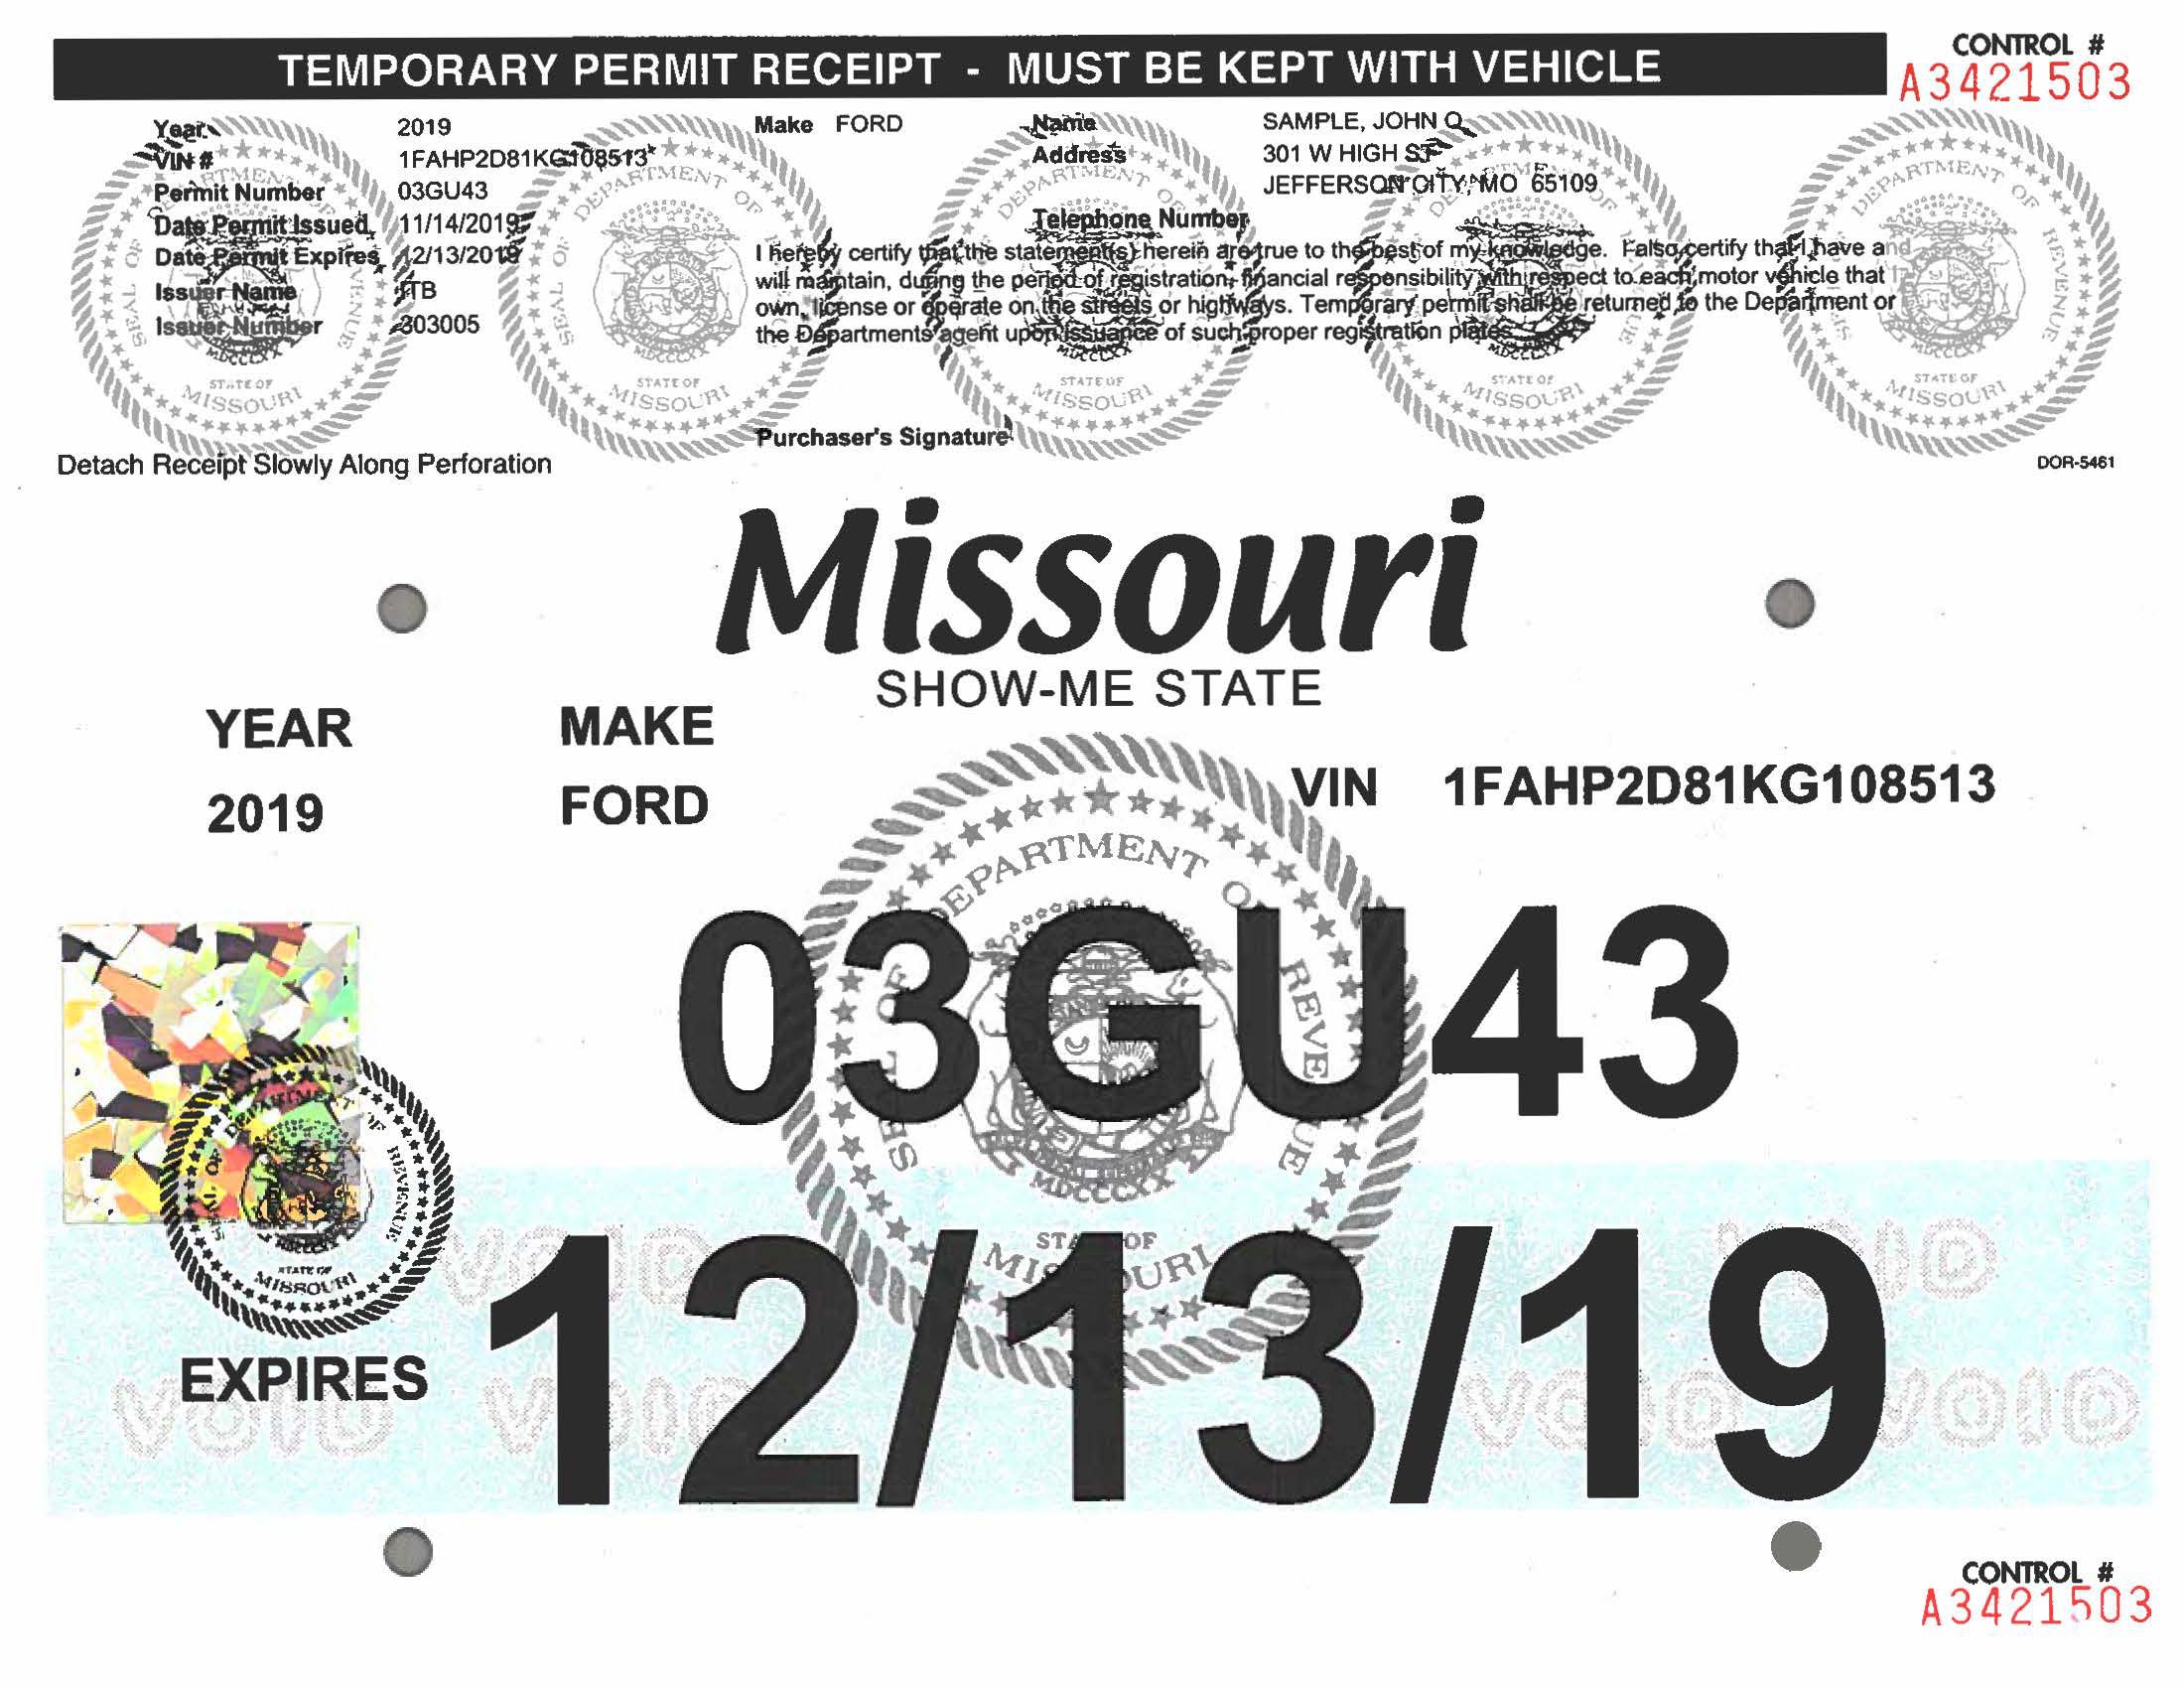 Do You Need Insurance To Get Temp Tags In Missouri